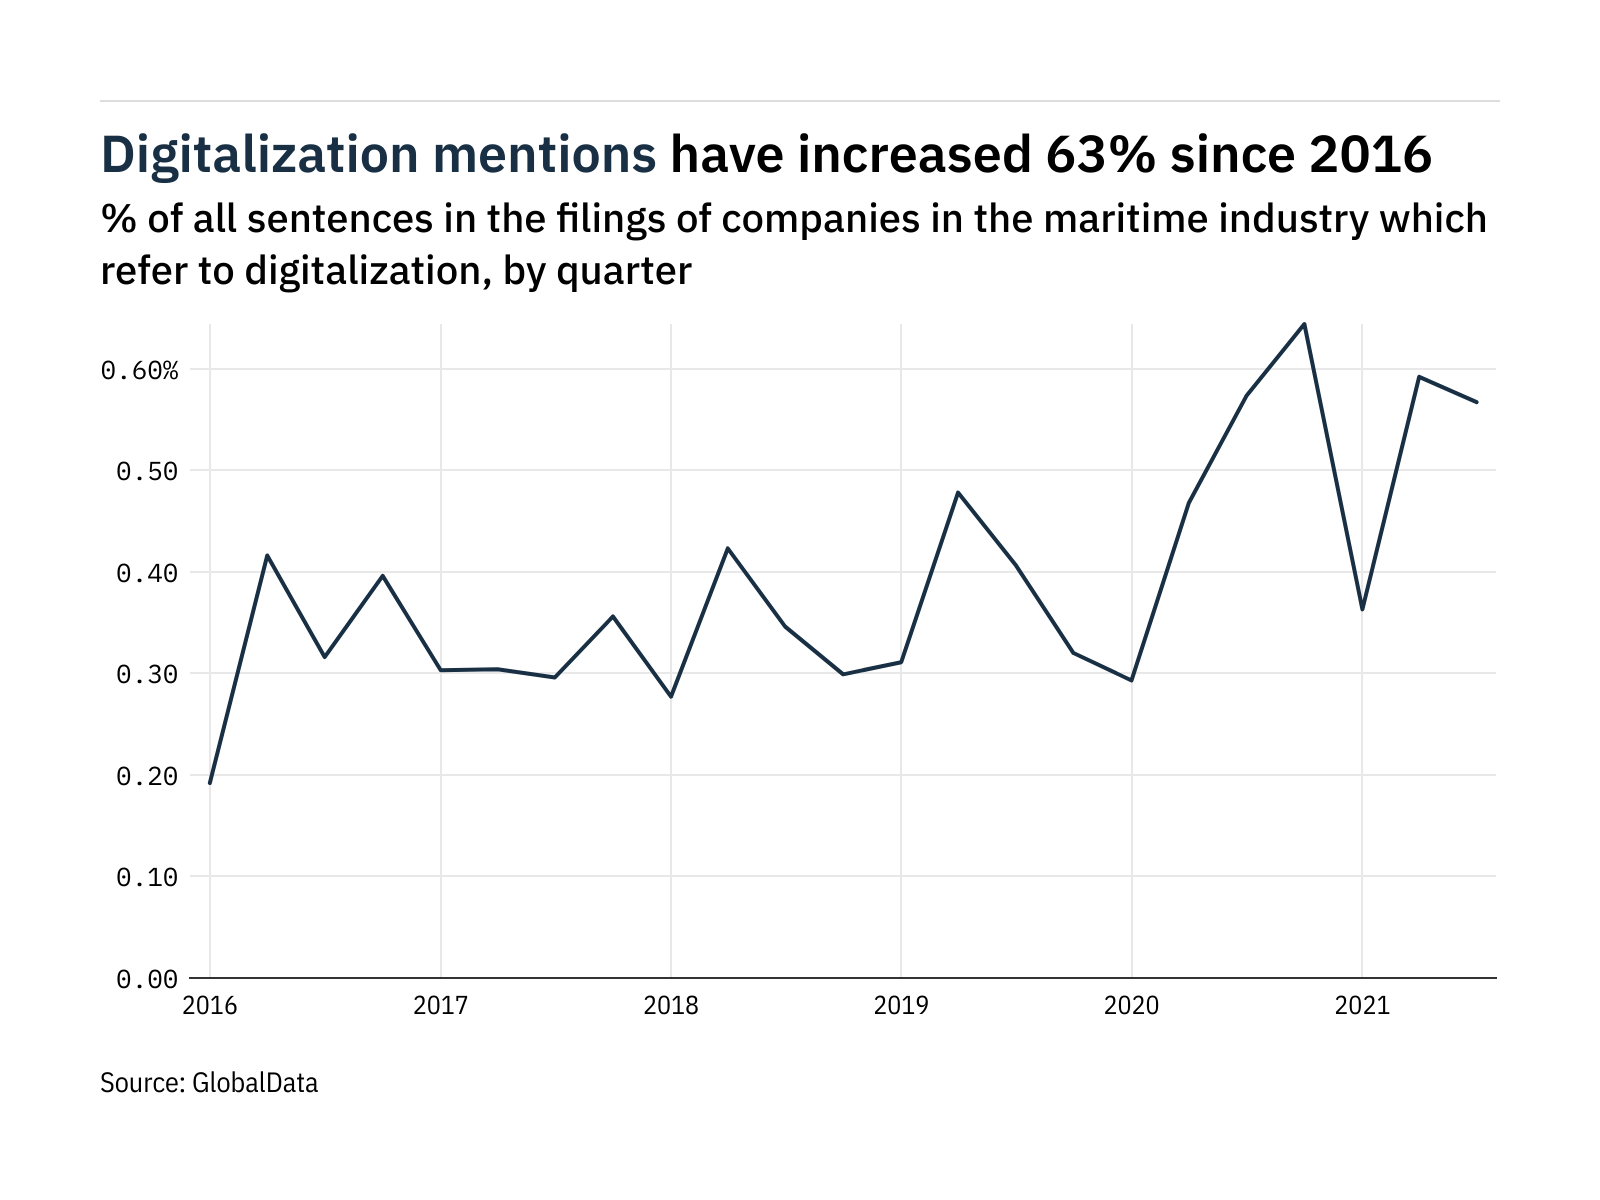 Filings buzz: tracking digitalization mentions in the maritime industry